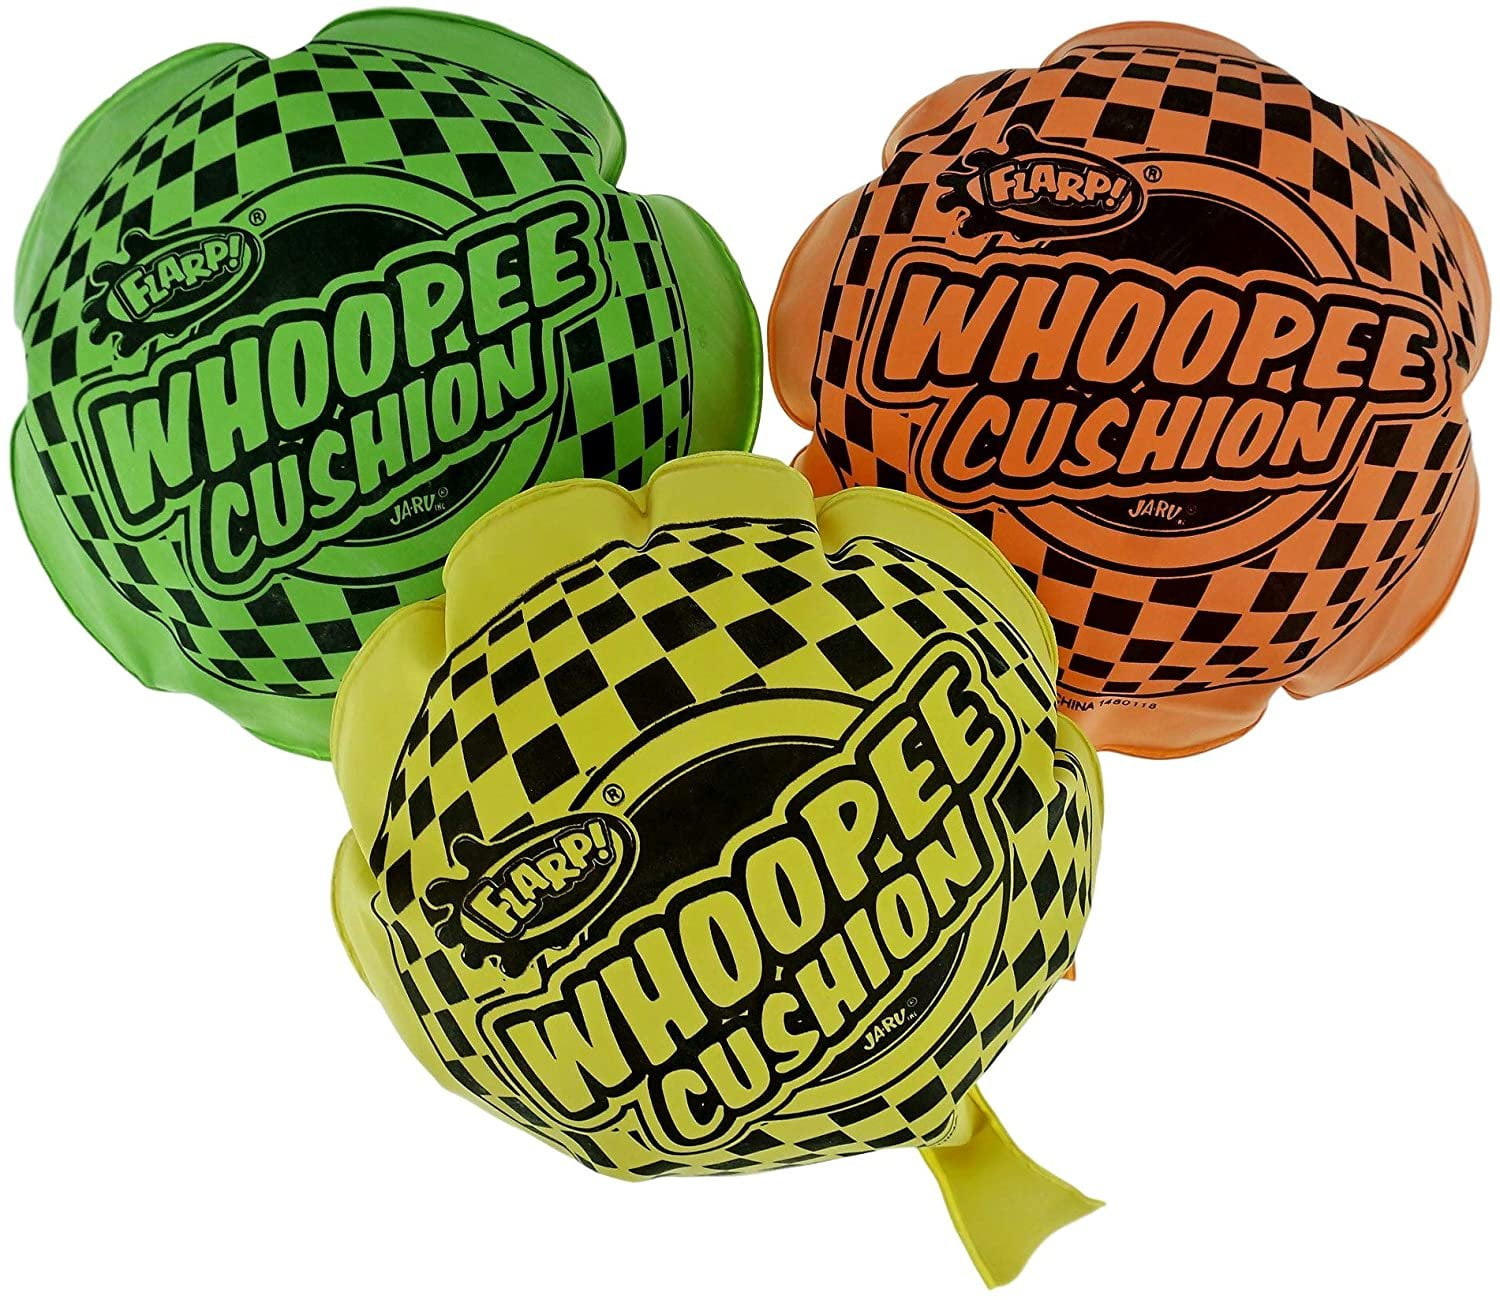 4" MINI WHOOPEE FART CUSHION Tiny Classic Whoopie Maker Gas Joke Sound Toy Funny 